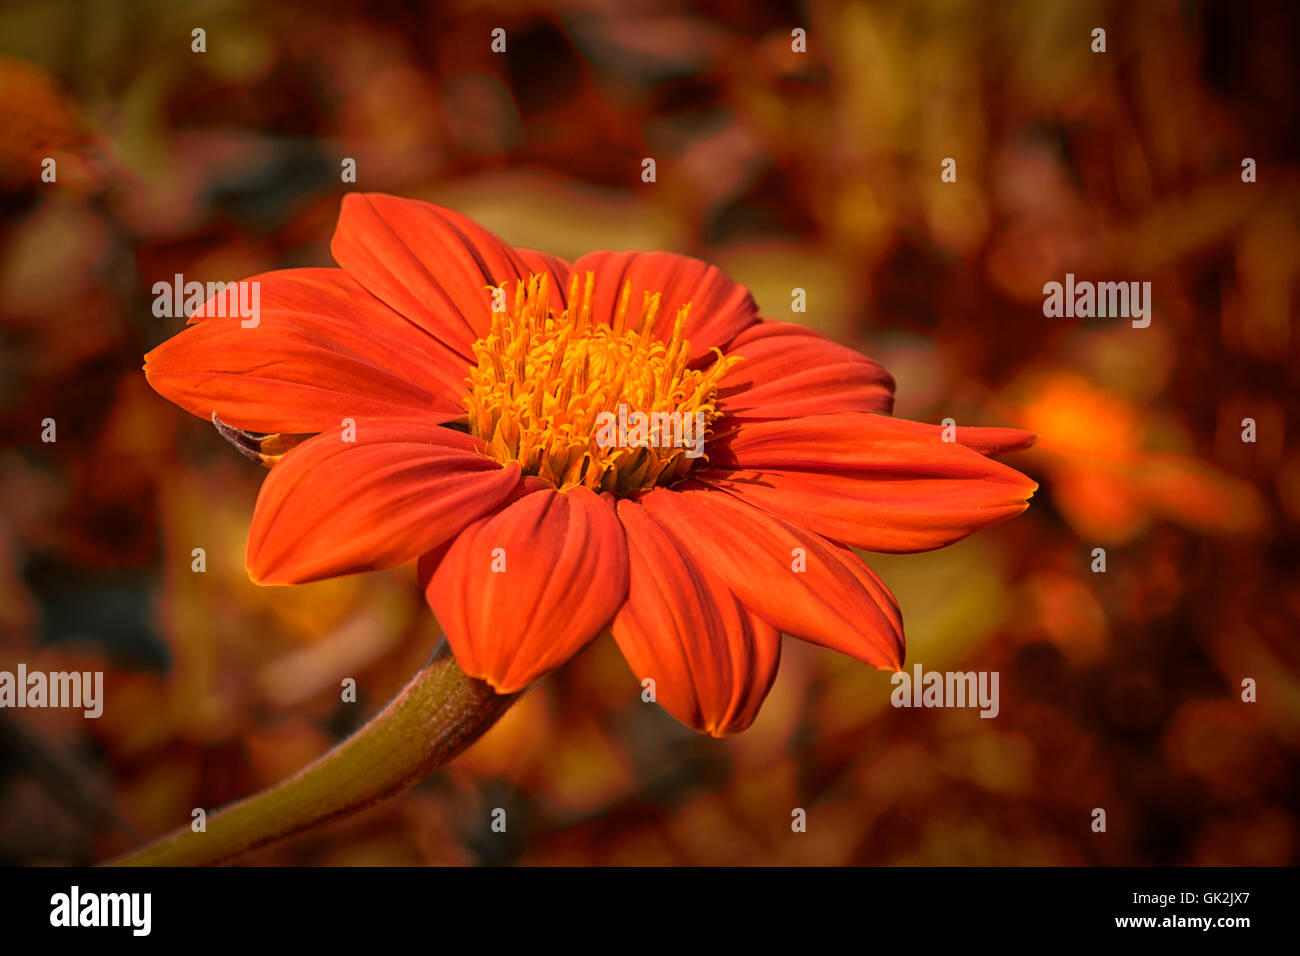 Stunning bright orange Mexican Sunflower in focus against muted background of autumnal colors Stock Photo